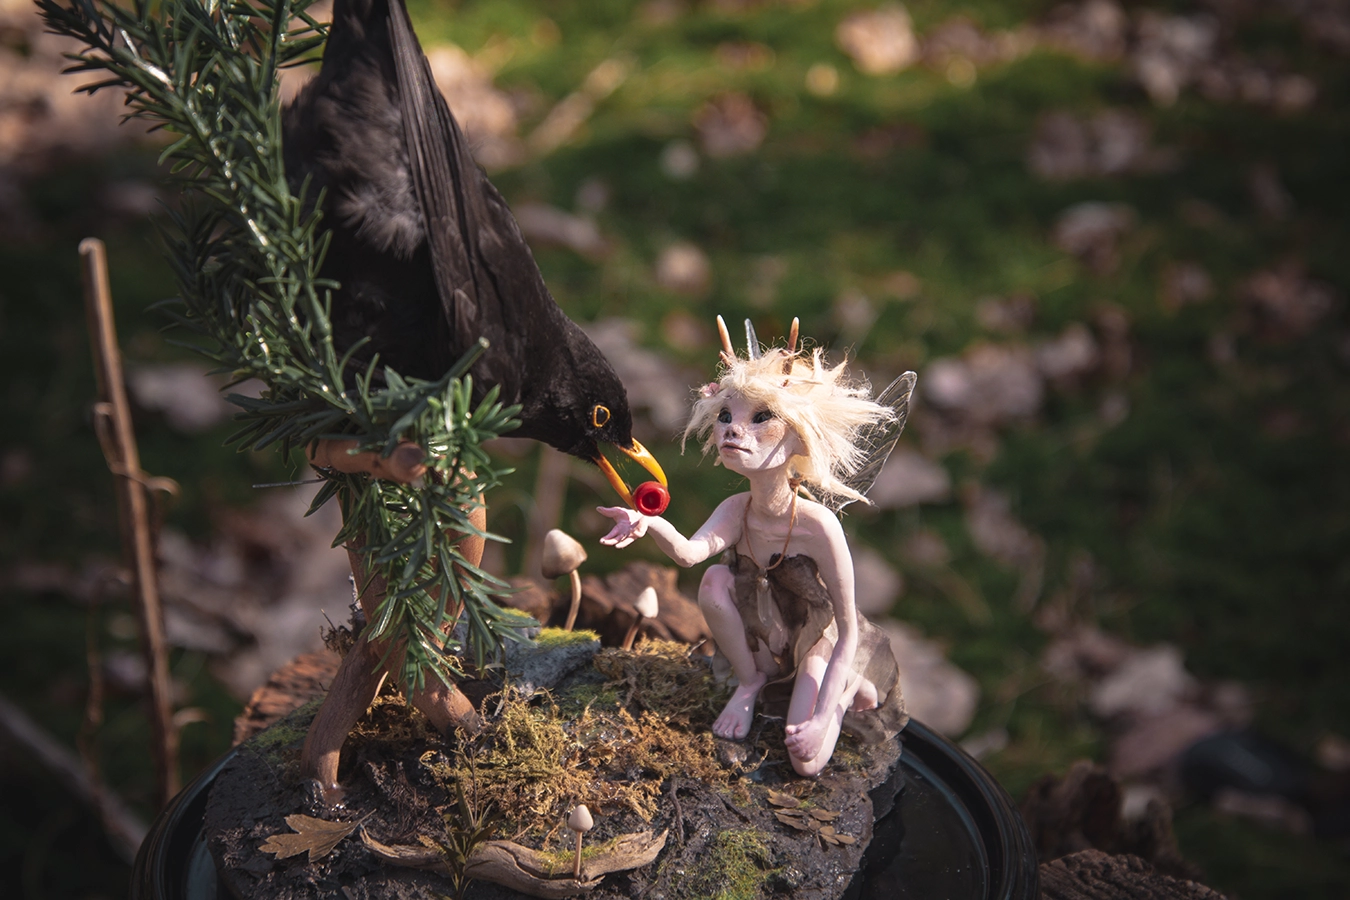 Fairy and taxidermy blackbird sculpture by Krysten Newby at the fable key